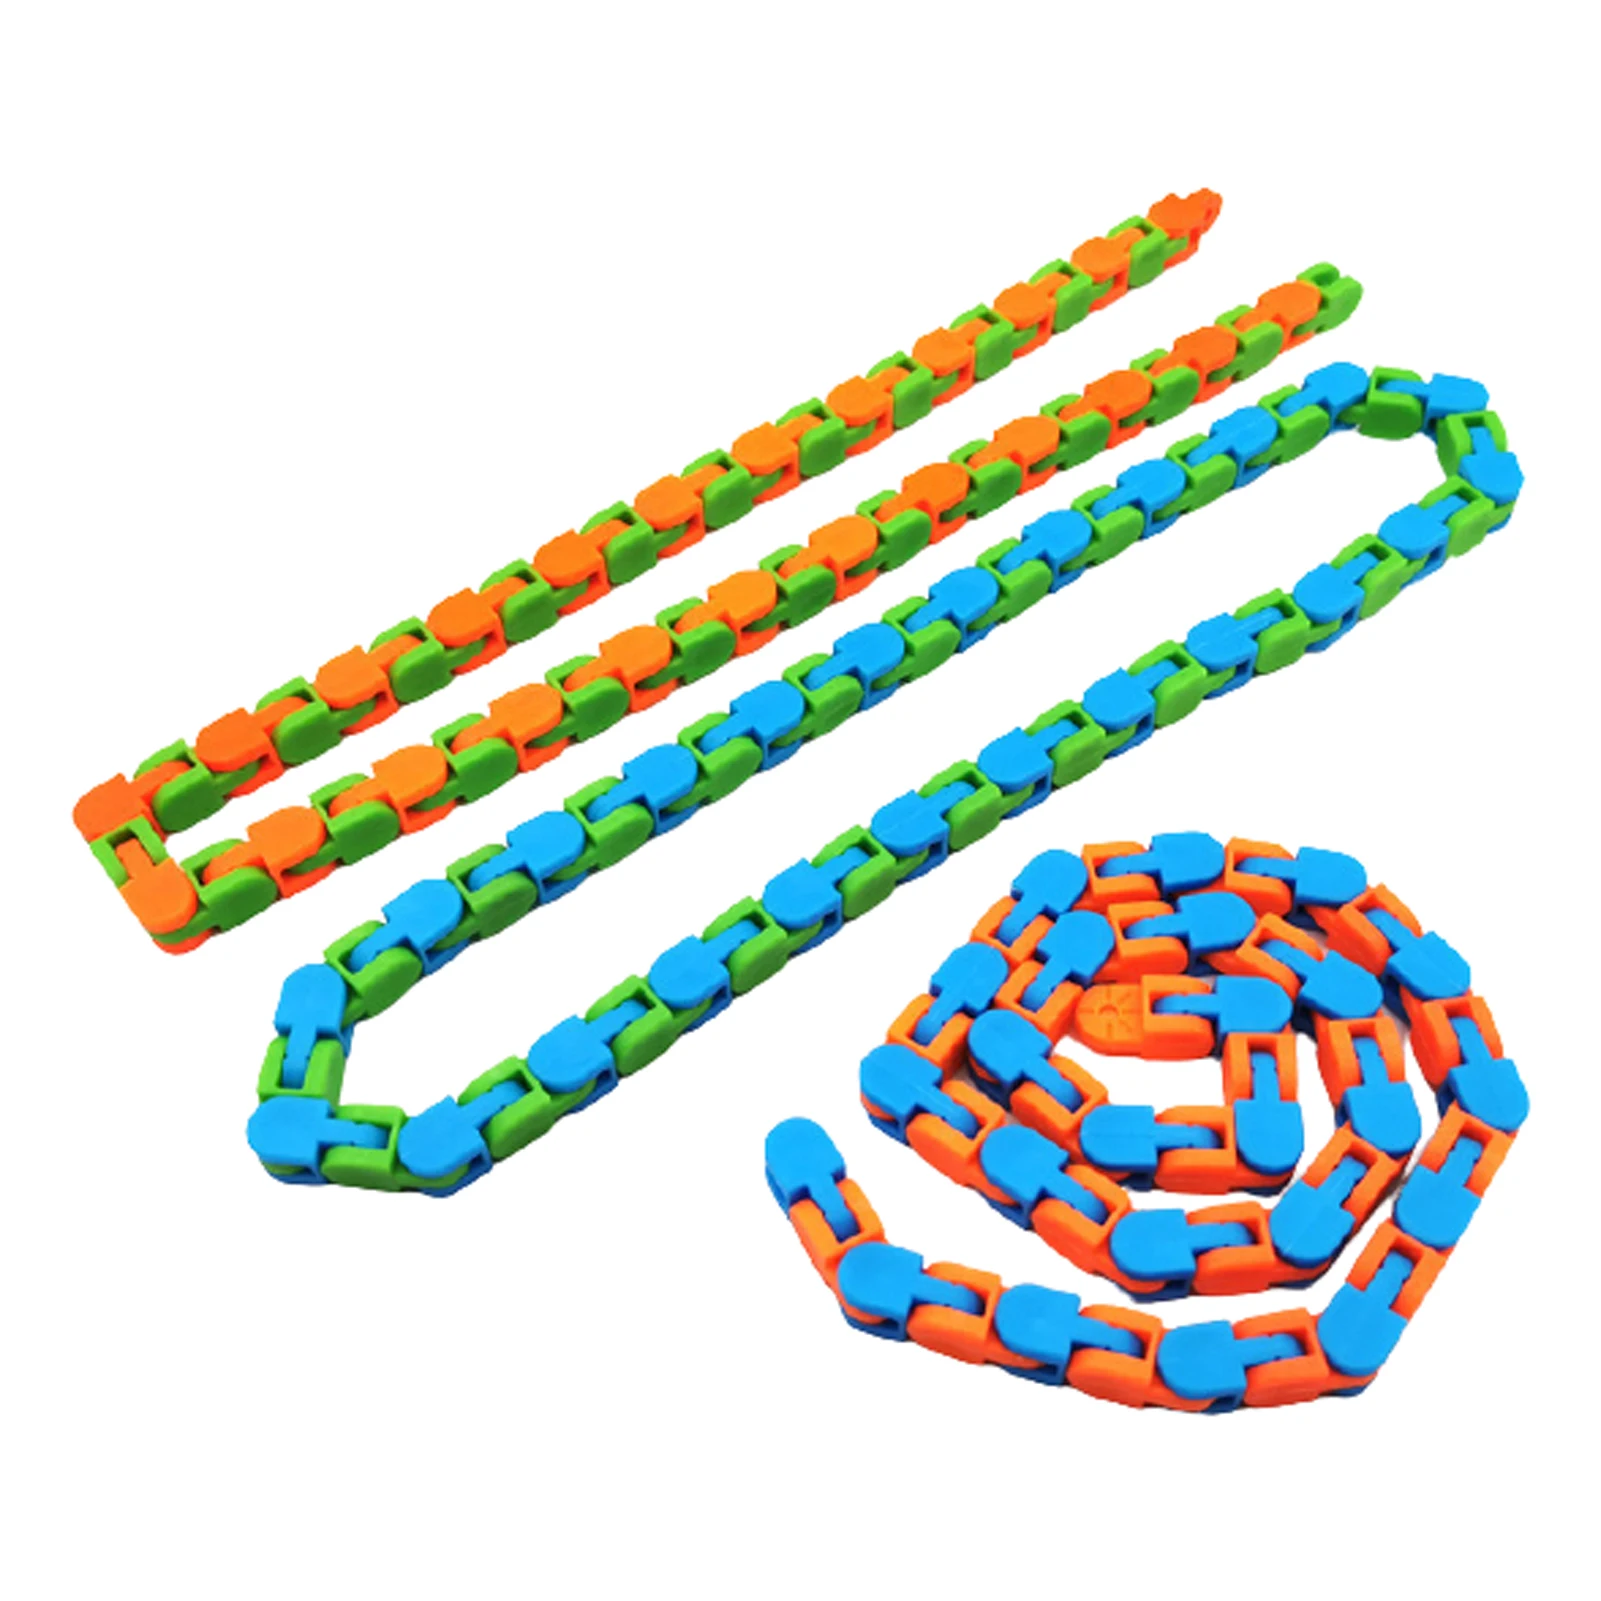 

3pcs/pack Stress Relief Toy Chain ADHD Wacky Snake Anxiety Click Party Kids Adults Finger Sensory Fidget Tracks